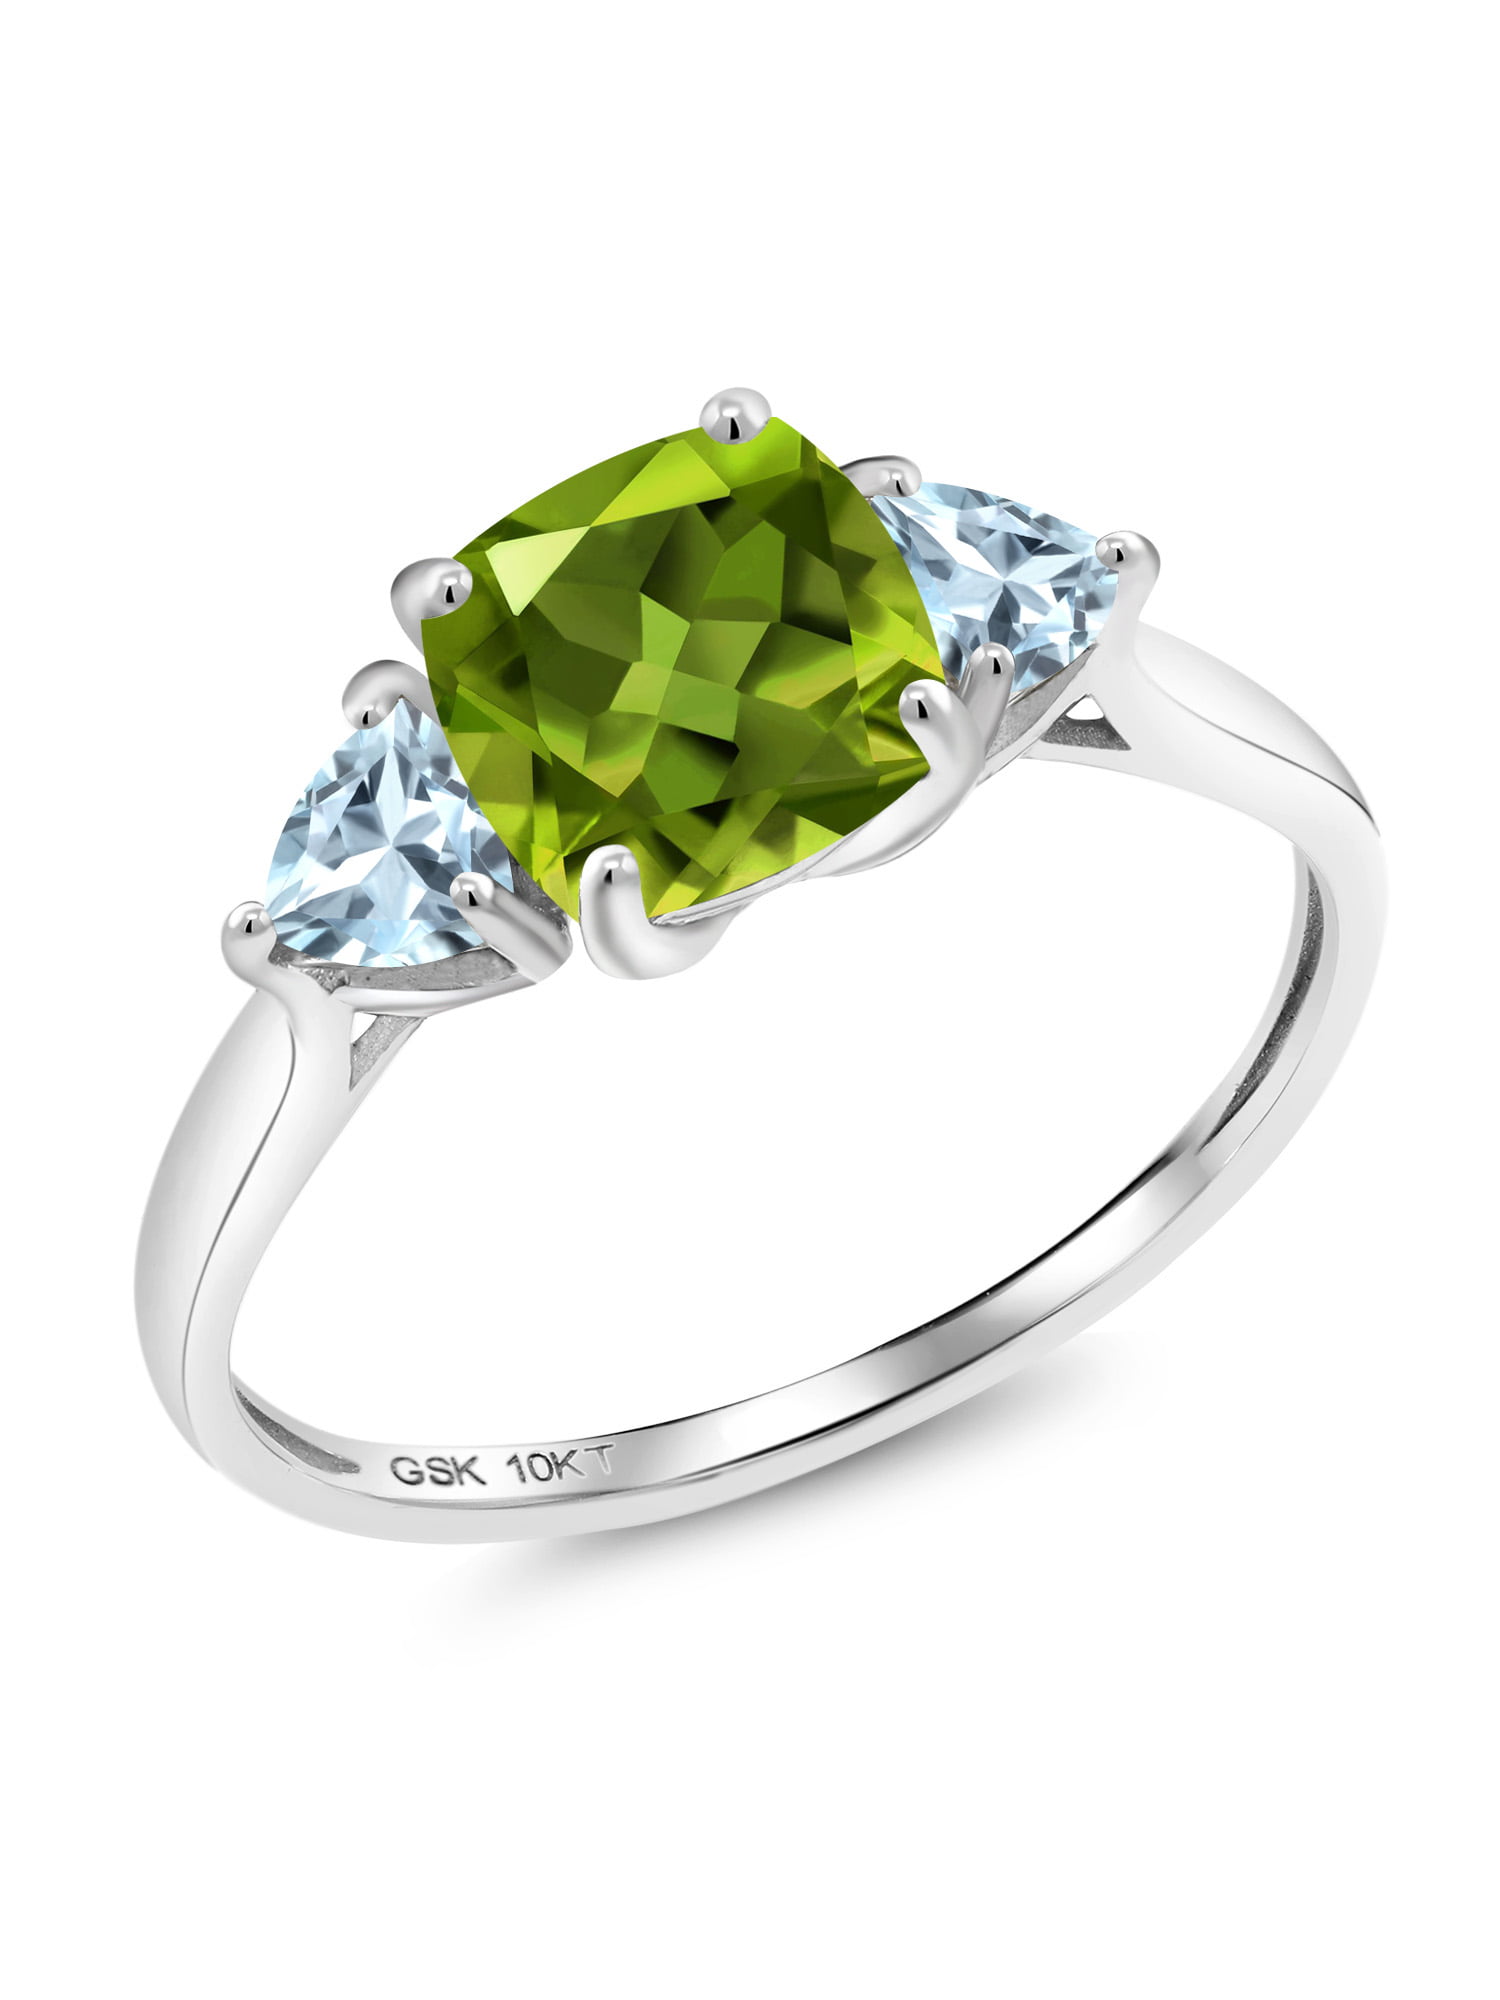 Gem Stone King 2.11 Ct Round Green Peridot 18K Yellow Gold Plated Silver Engagement Ring 